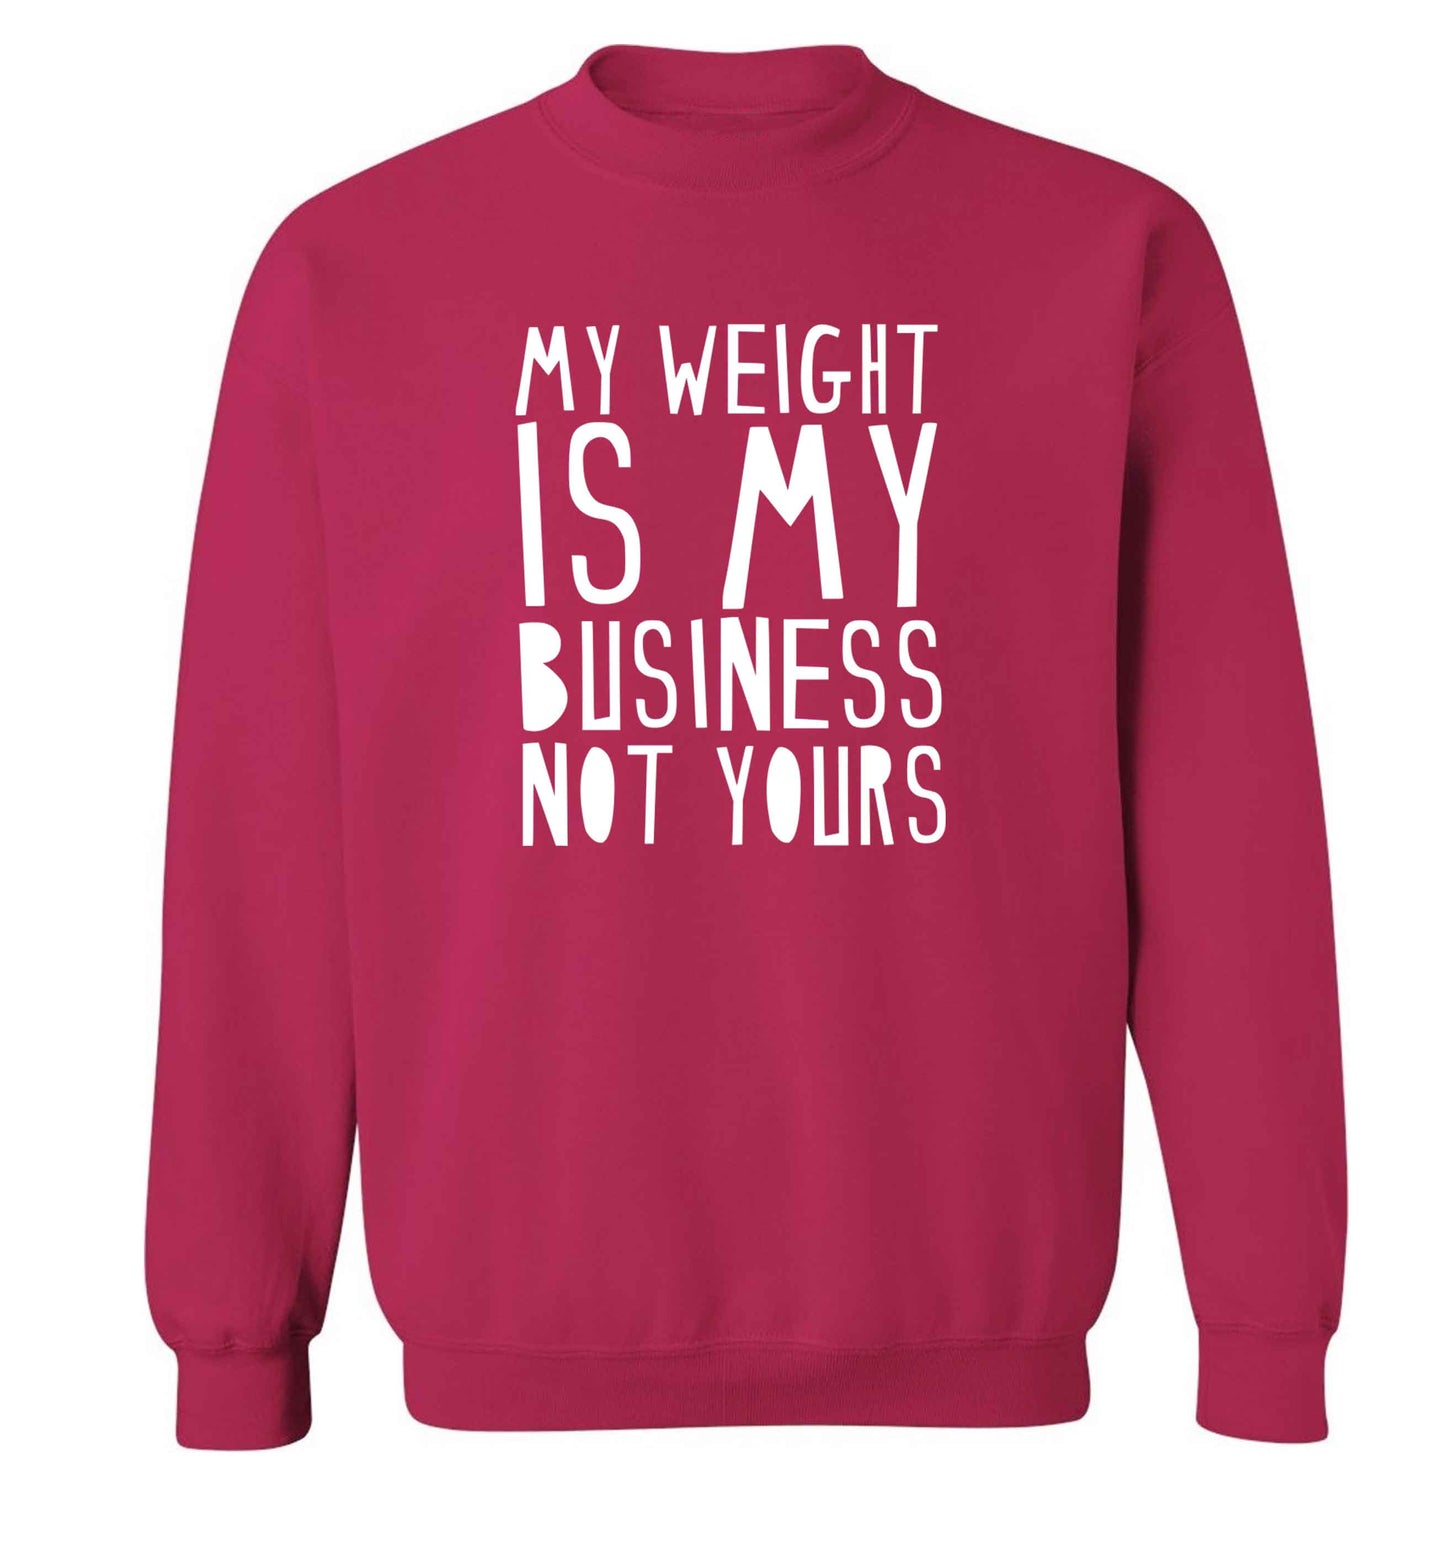 My weight is my business not yours adult's unisex pink sweater 2XL